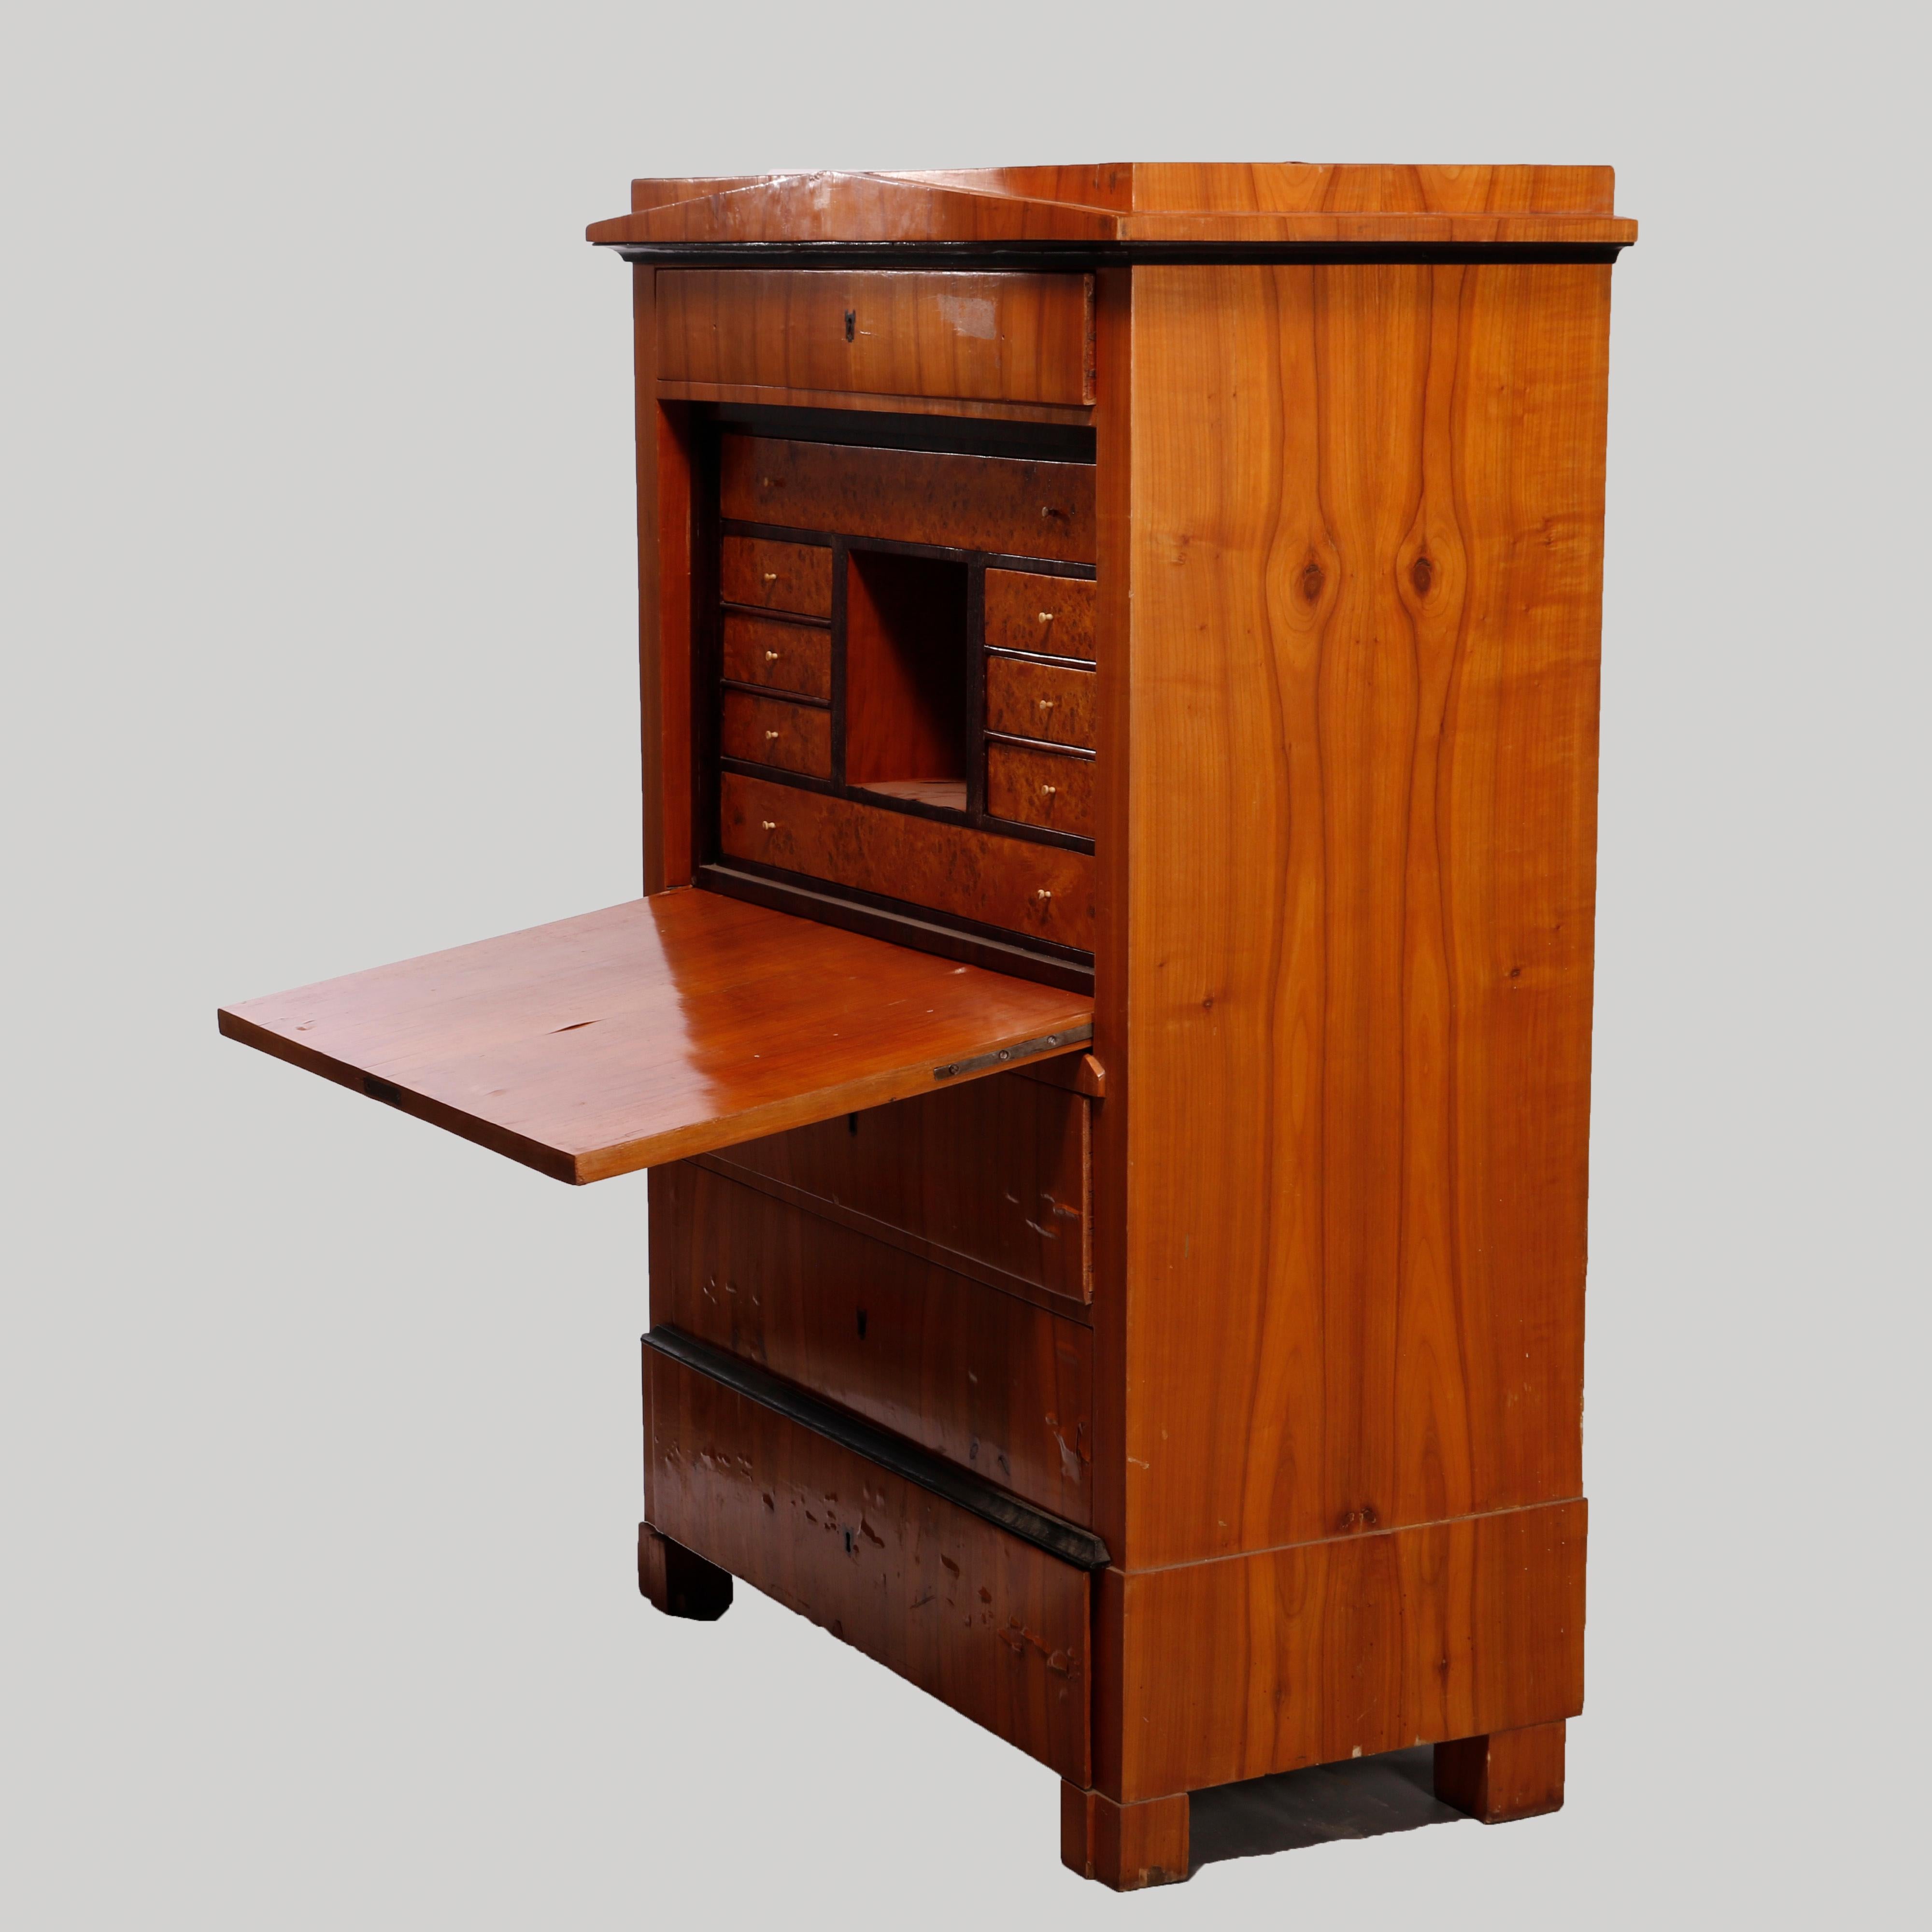 An antique Biedermeier abattant secretary offers olive wood and burl construction with upper frieze drawer over drop front secretary and three long drawers, raised on block feet, ebonized highlight trim throughout, c1830

Measures- 59.75''H x 42''W